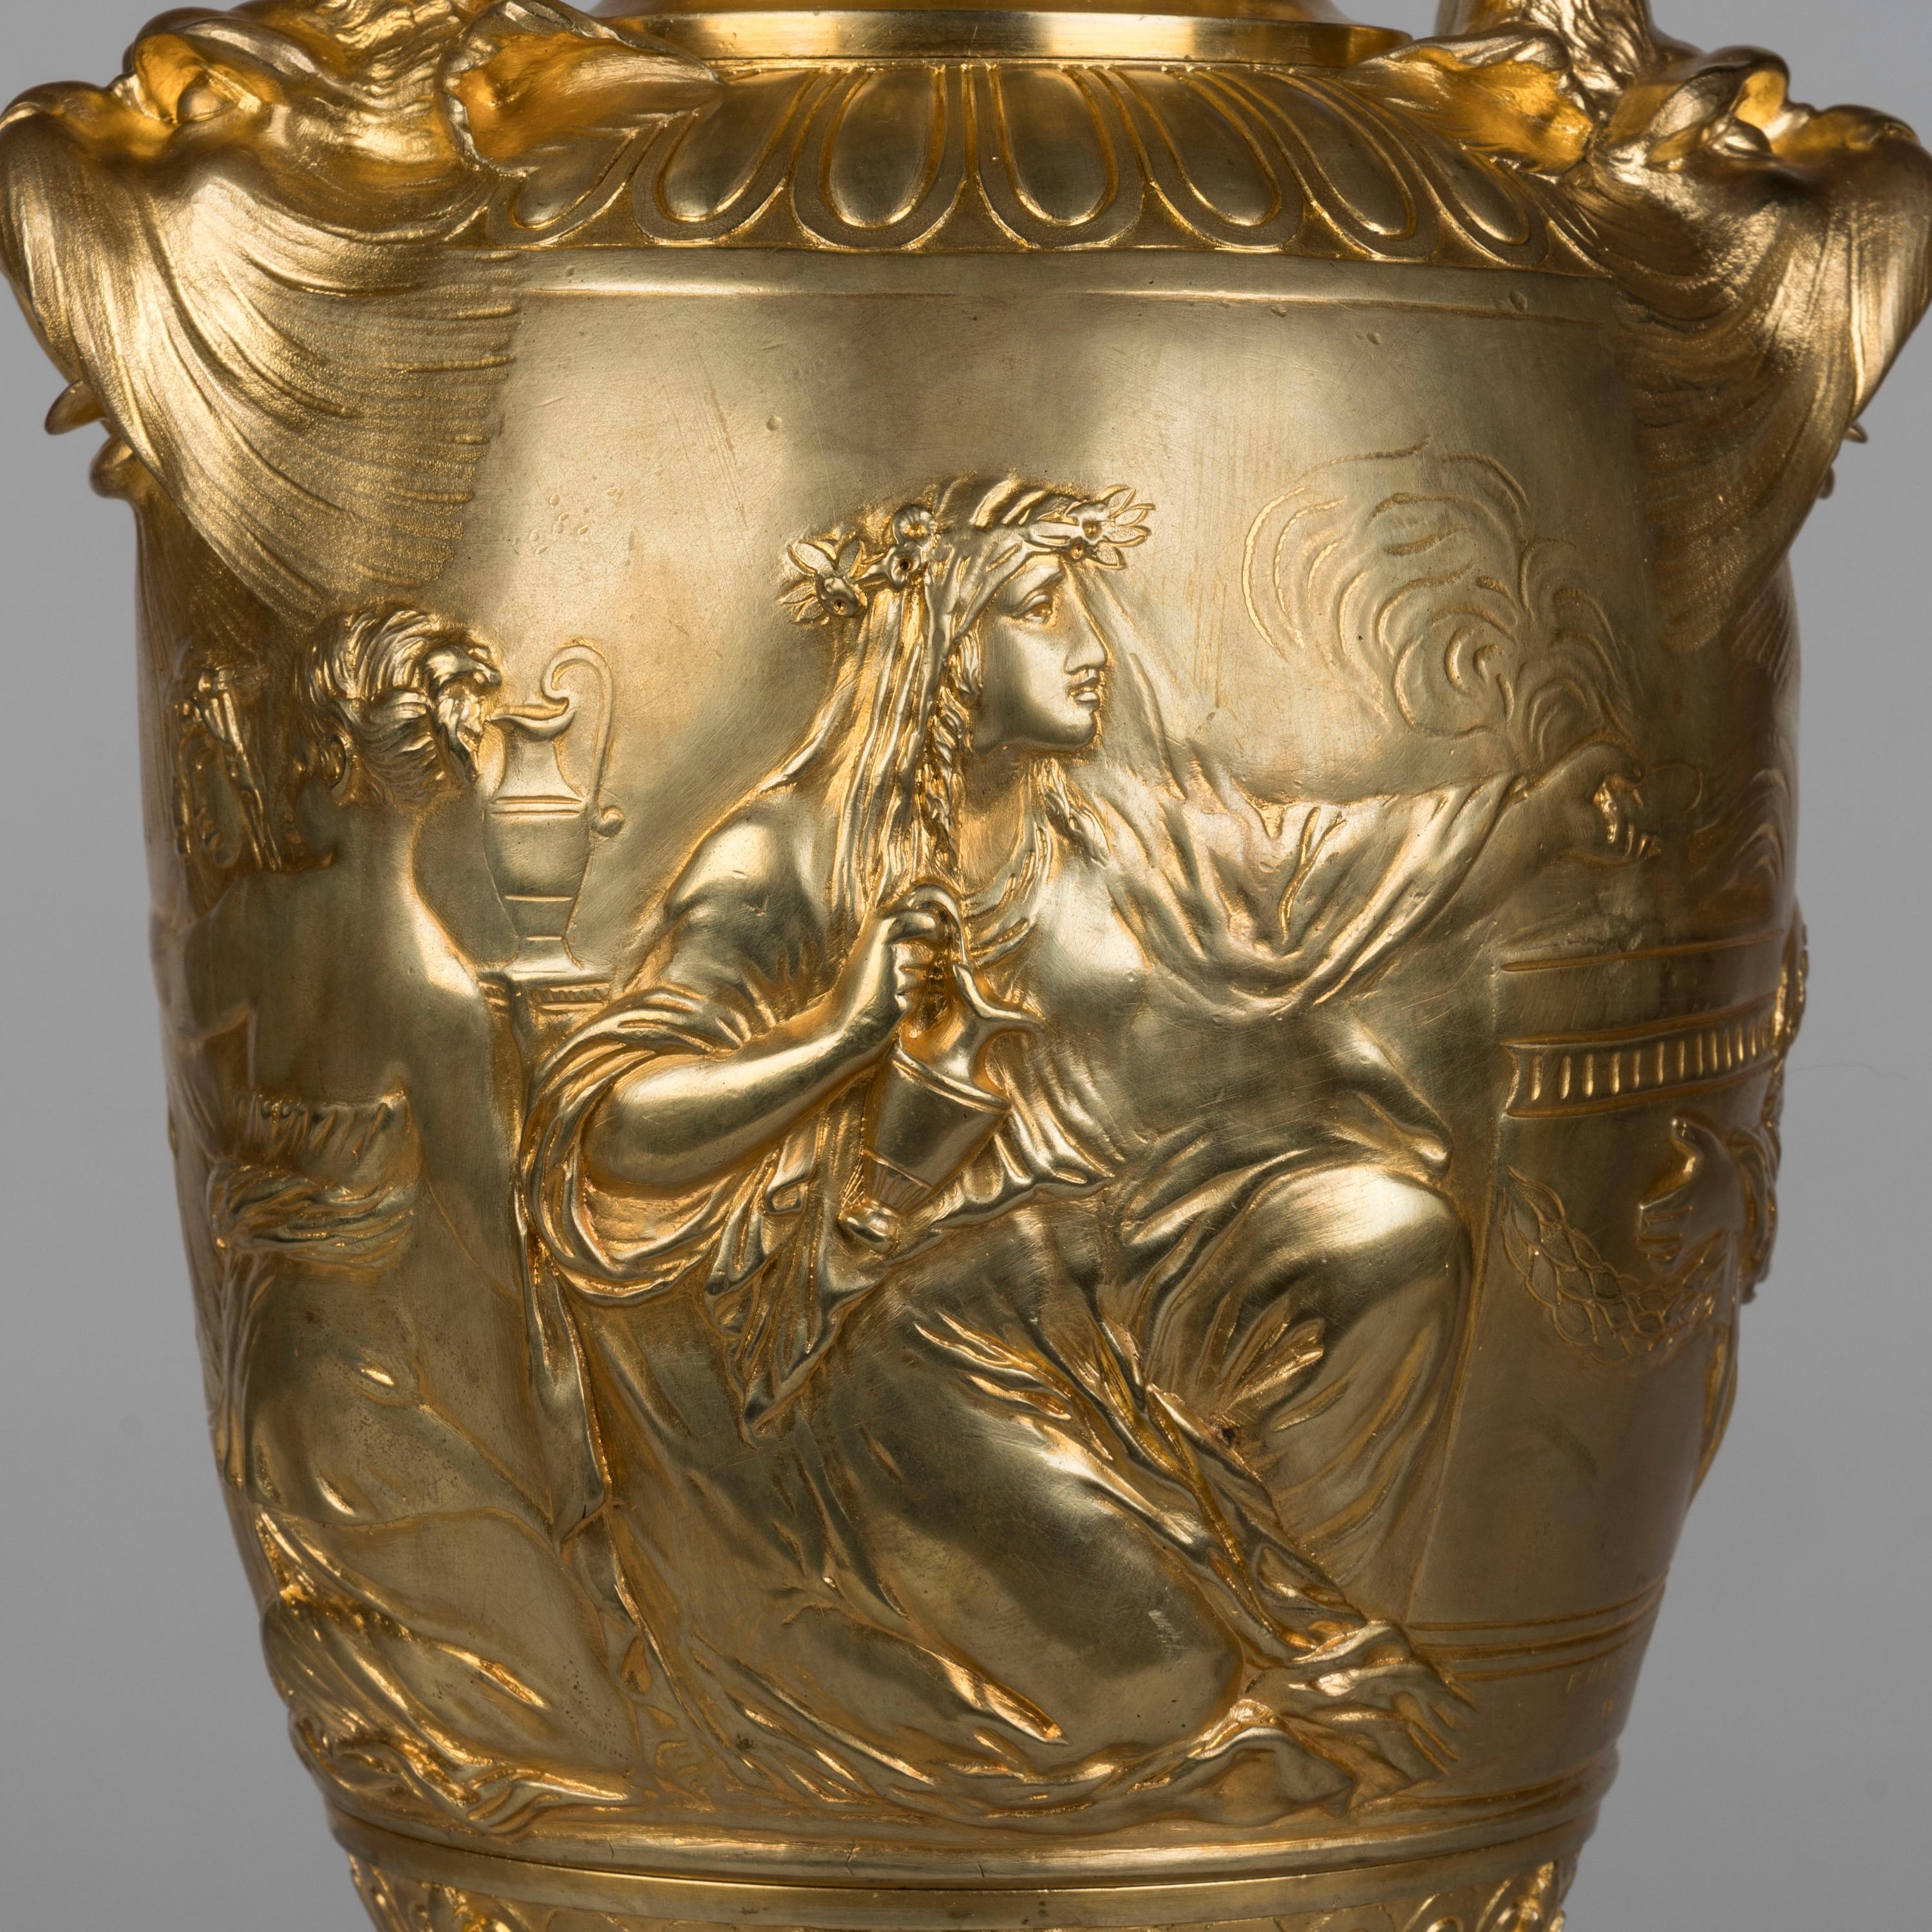 A Pair of bronze Vases
Depicting the 'Sacrifice to Venus'

Designed by Clodion
Cast by Barbedienne

Constructed from cast and hand-chased gilded bronze and supported on Griotte Rouge marble bases, the twin-handled vases in the Neoclassical